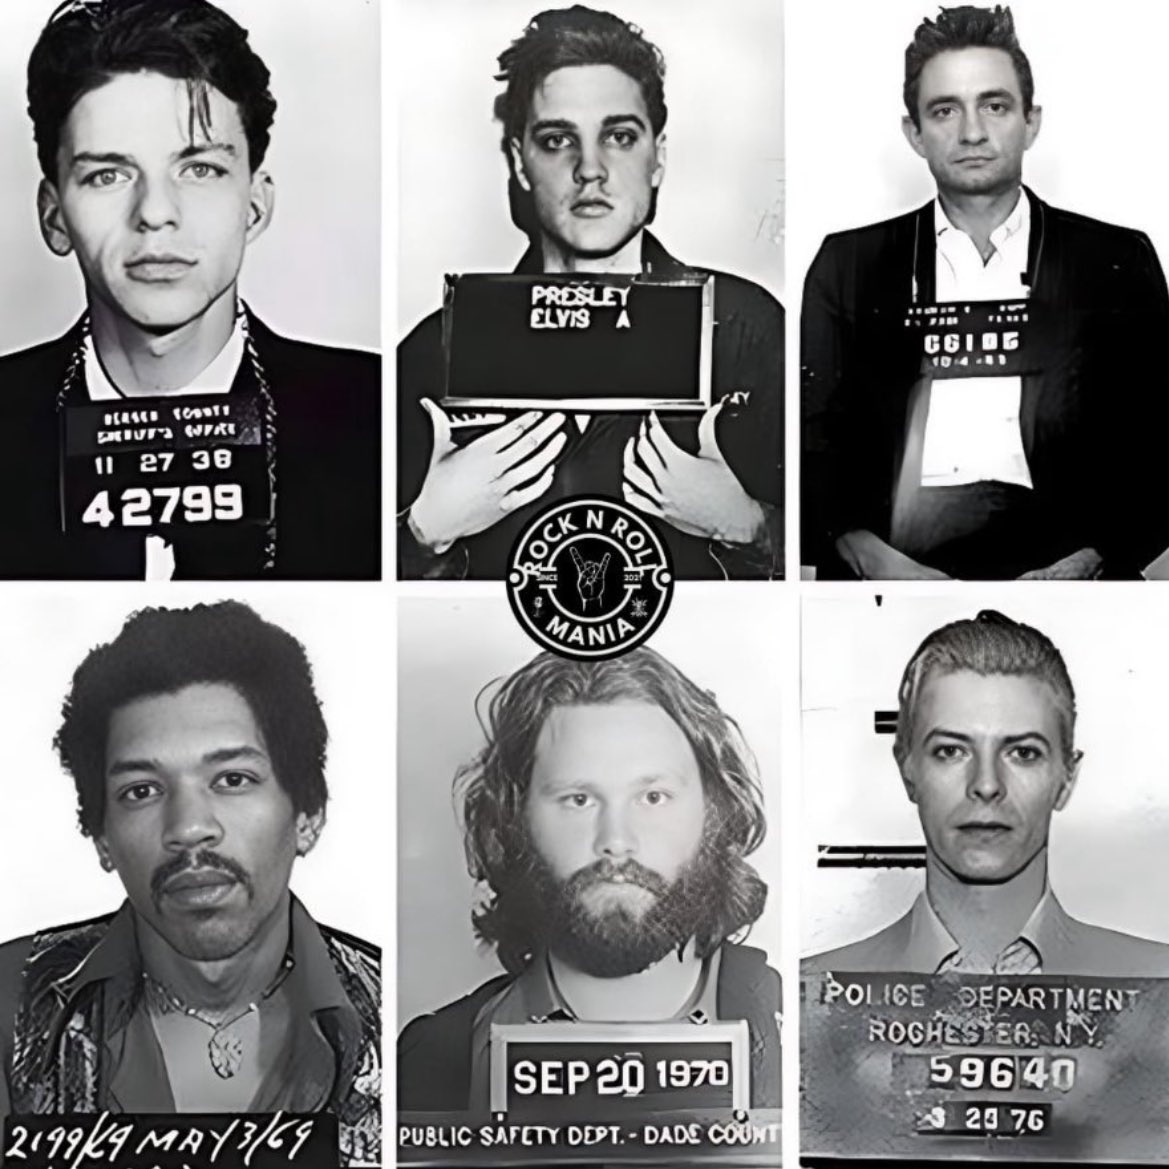 Who had the most epic Mugshot?